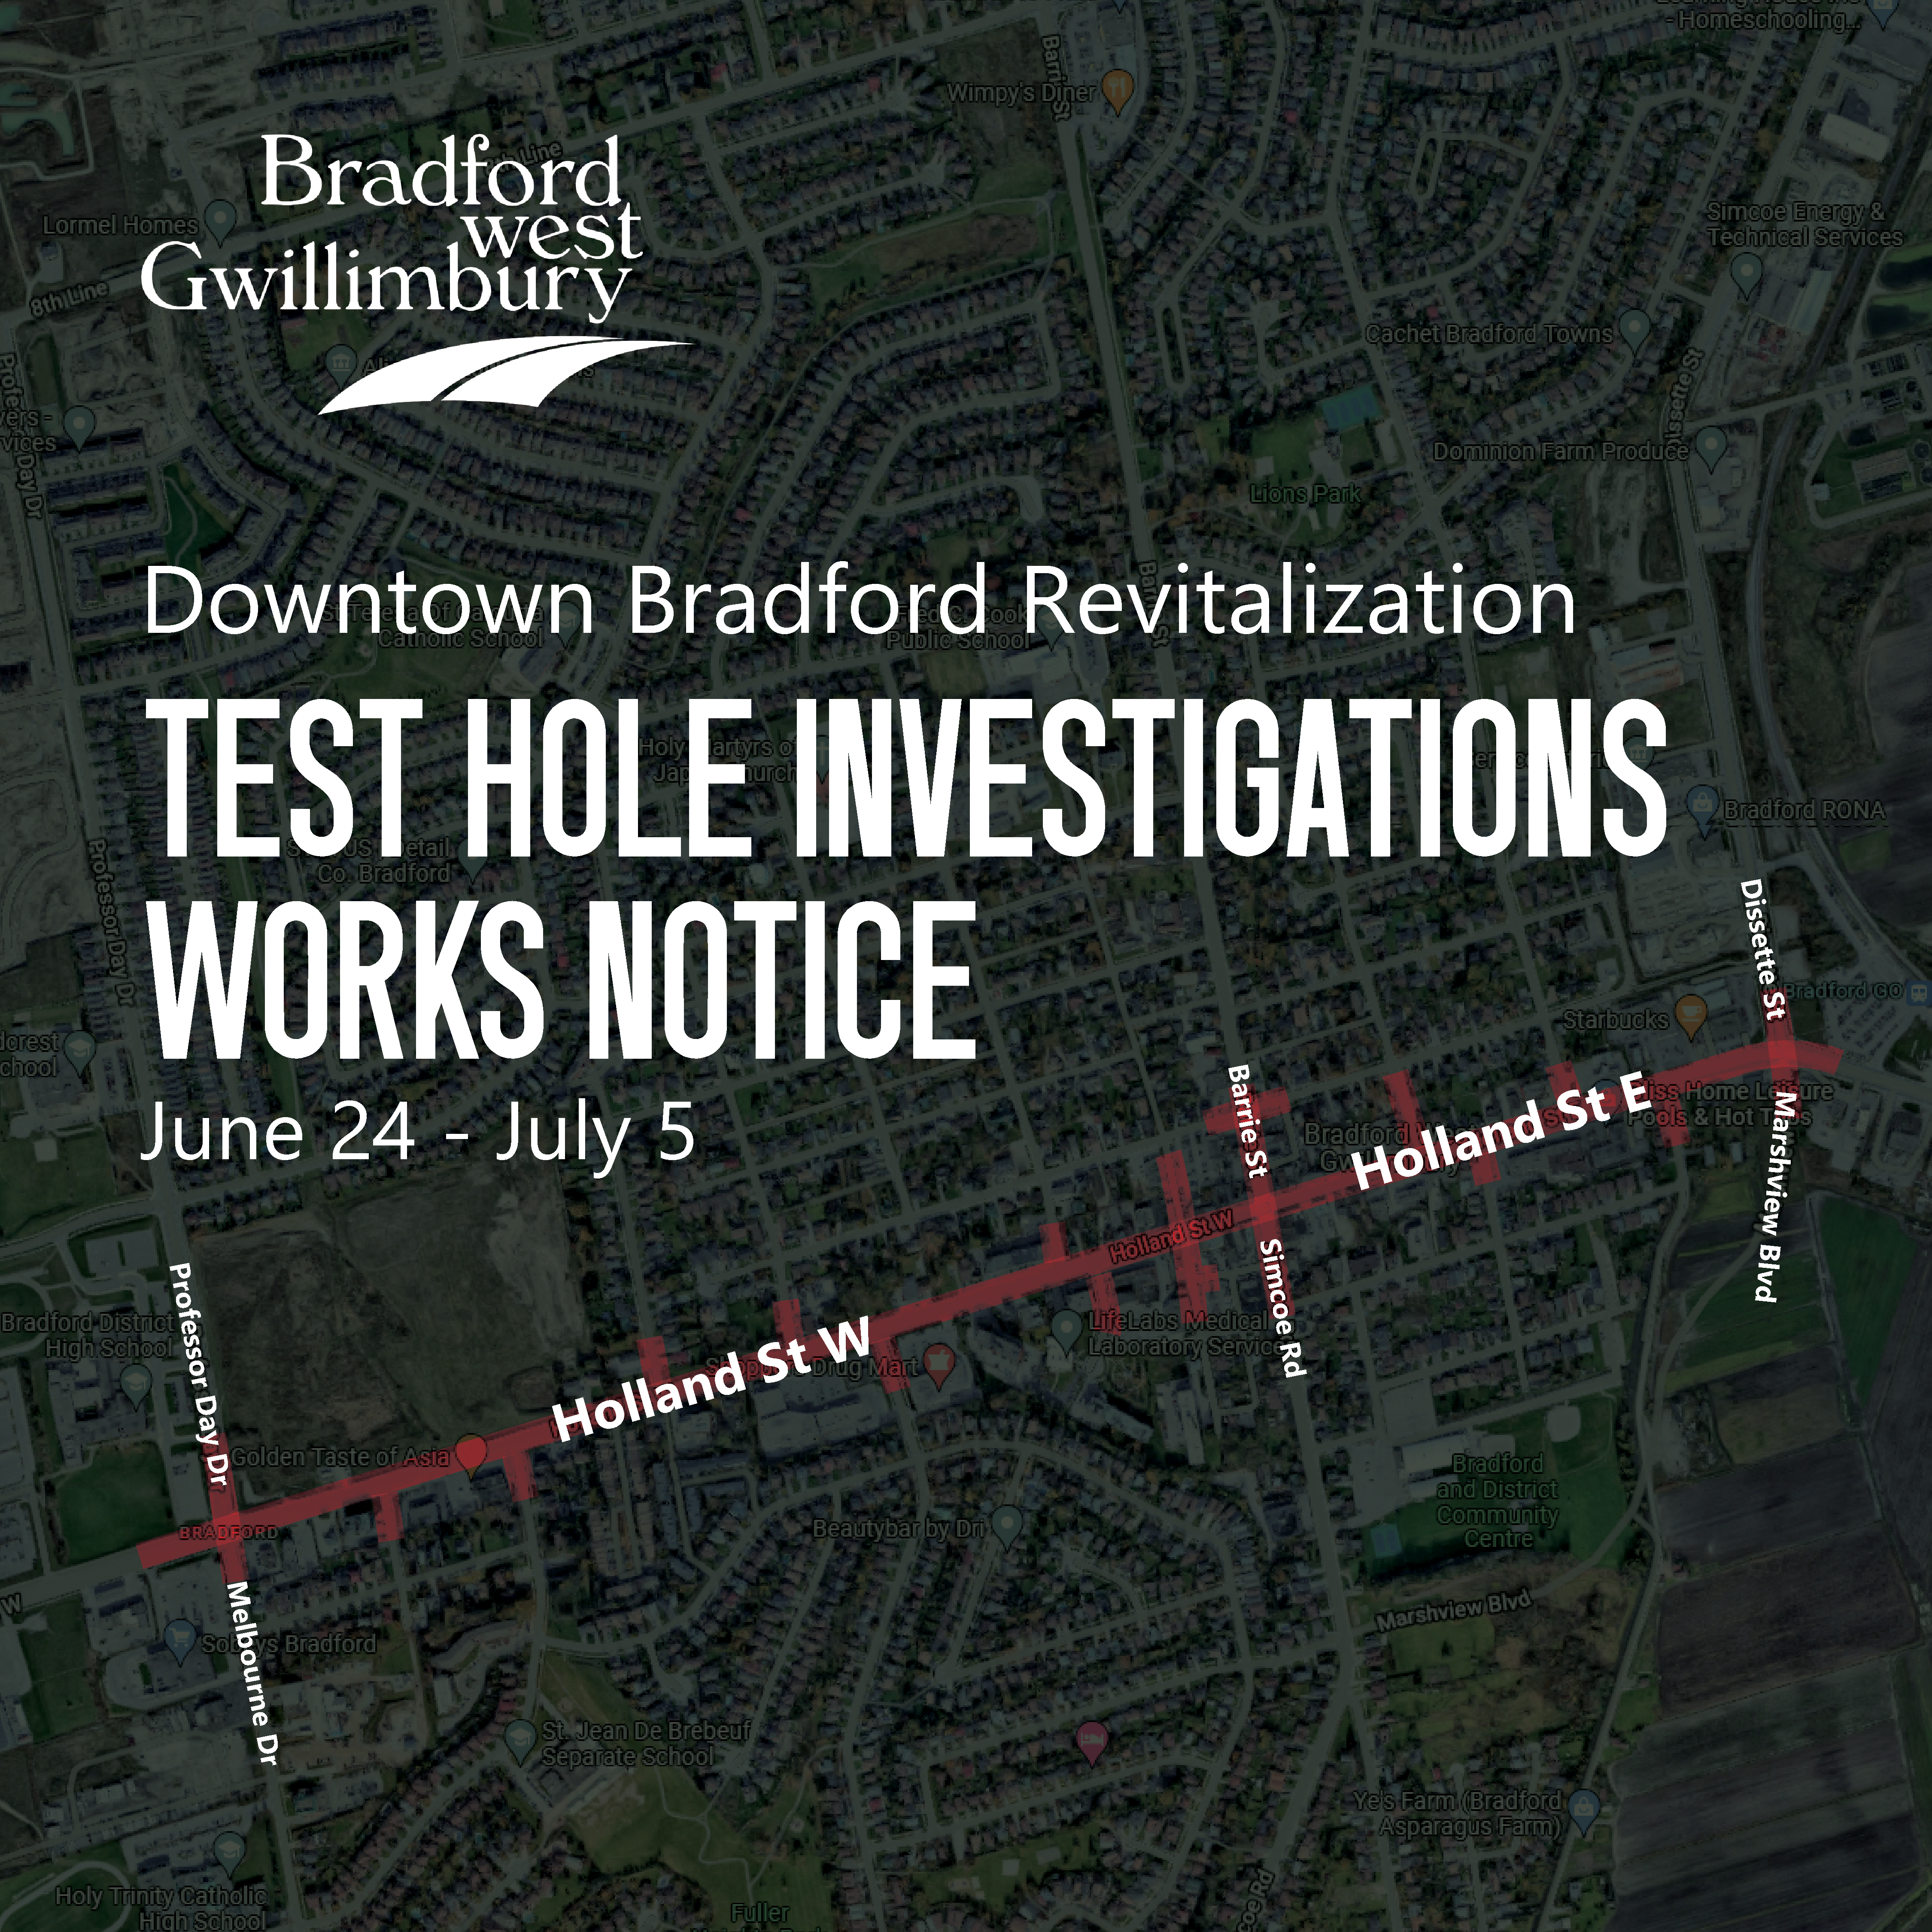 Graphic showing test area on Holland Street